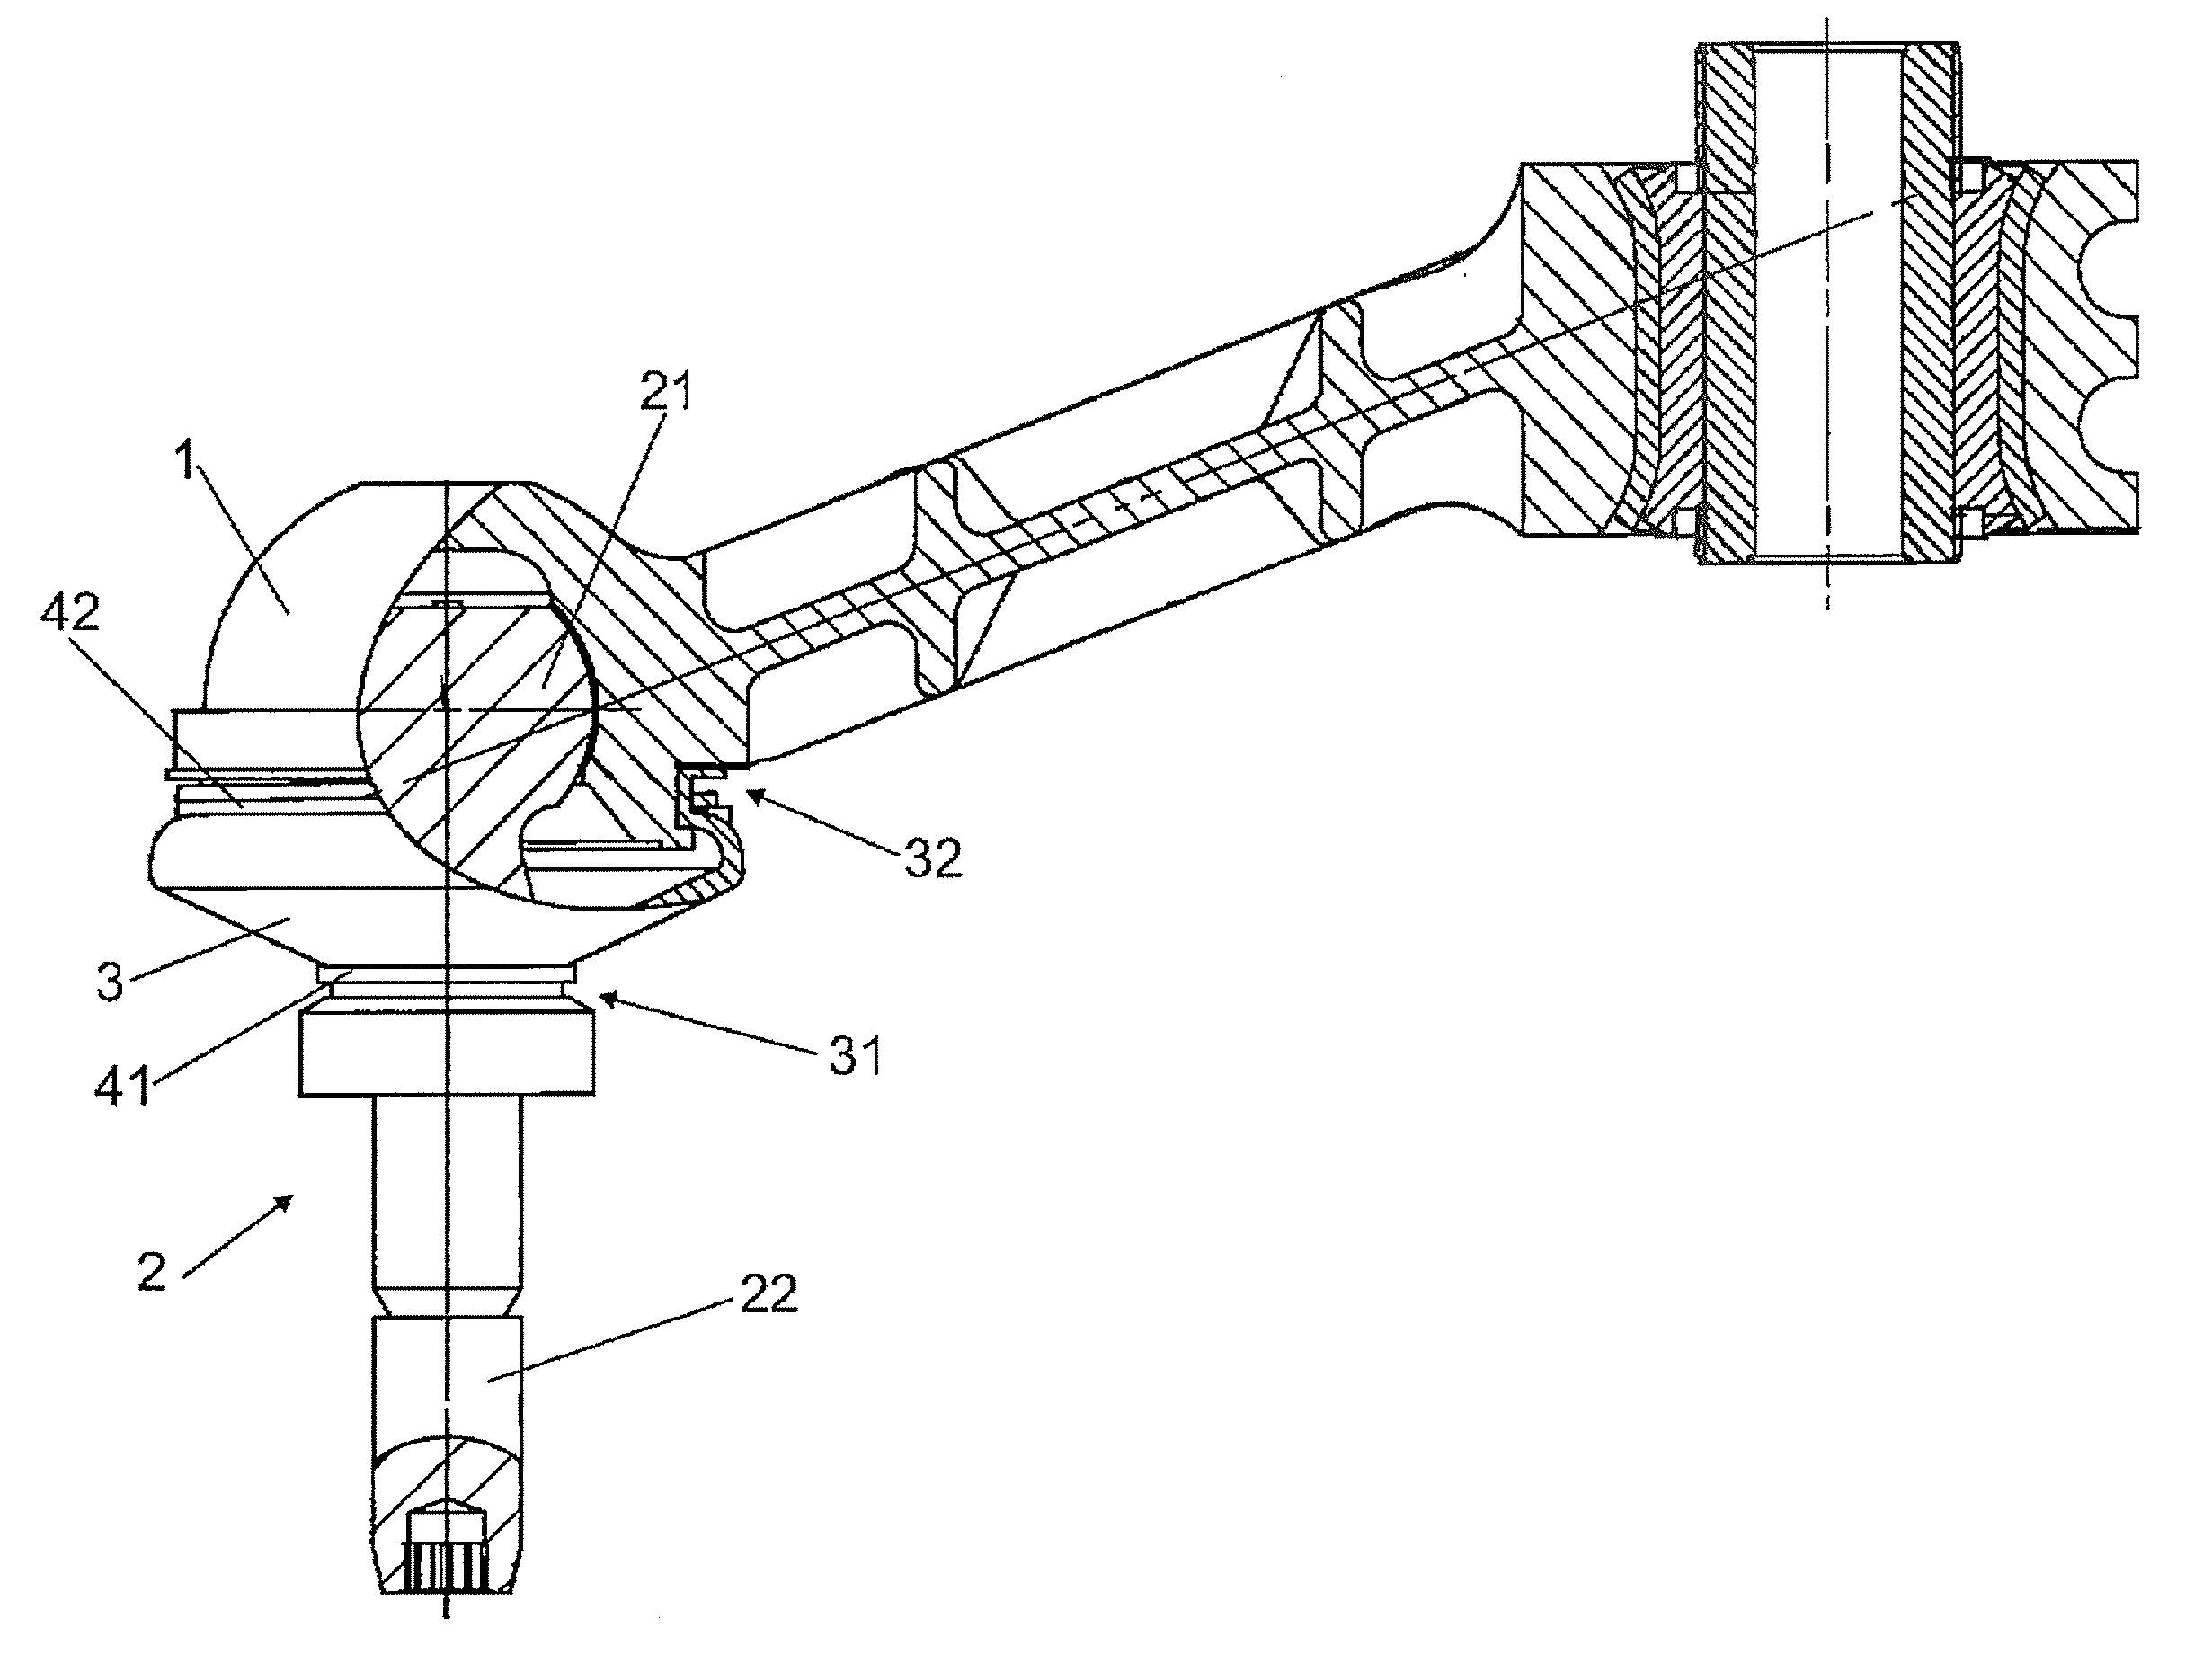 Ball joint device, manufacturing process and apparatus